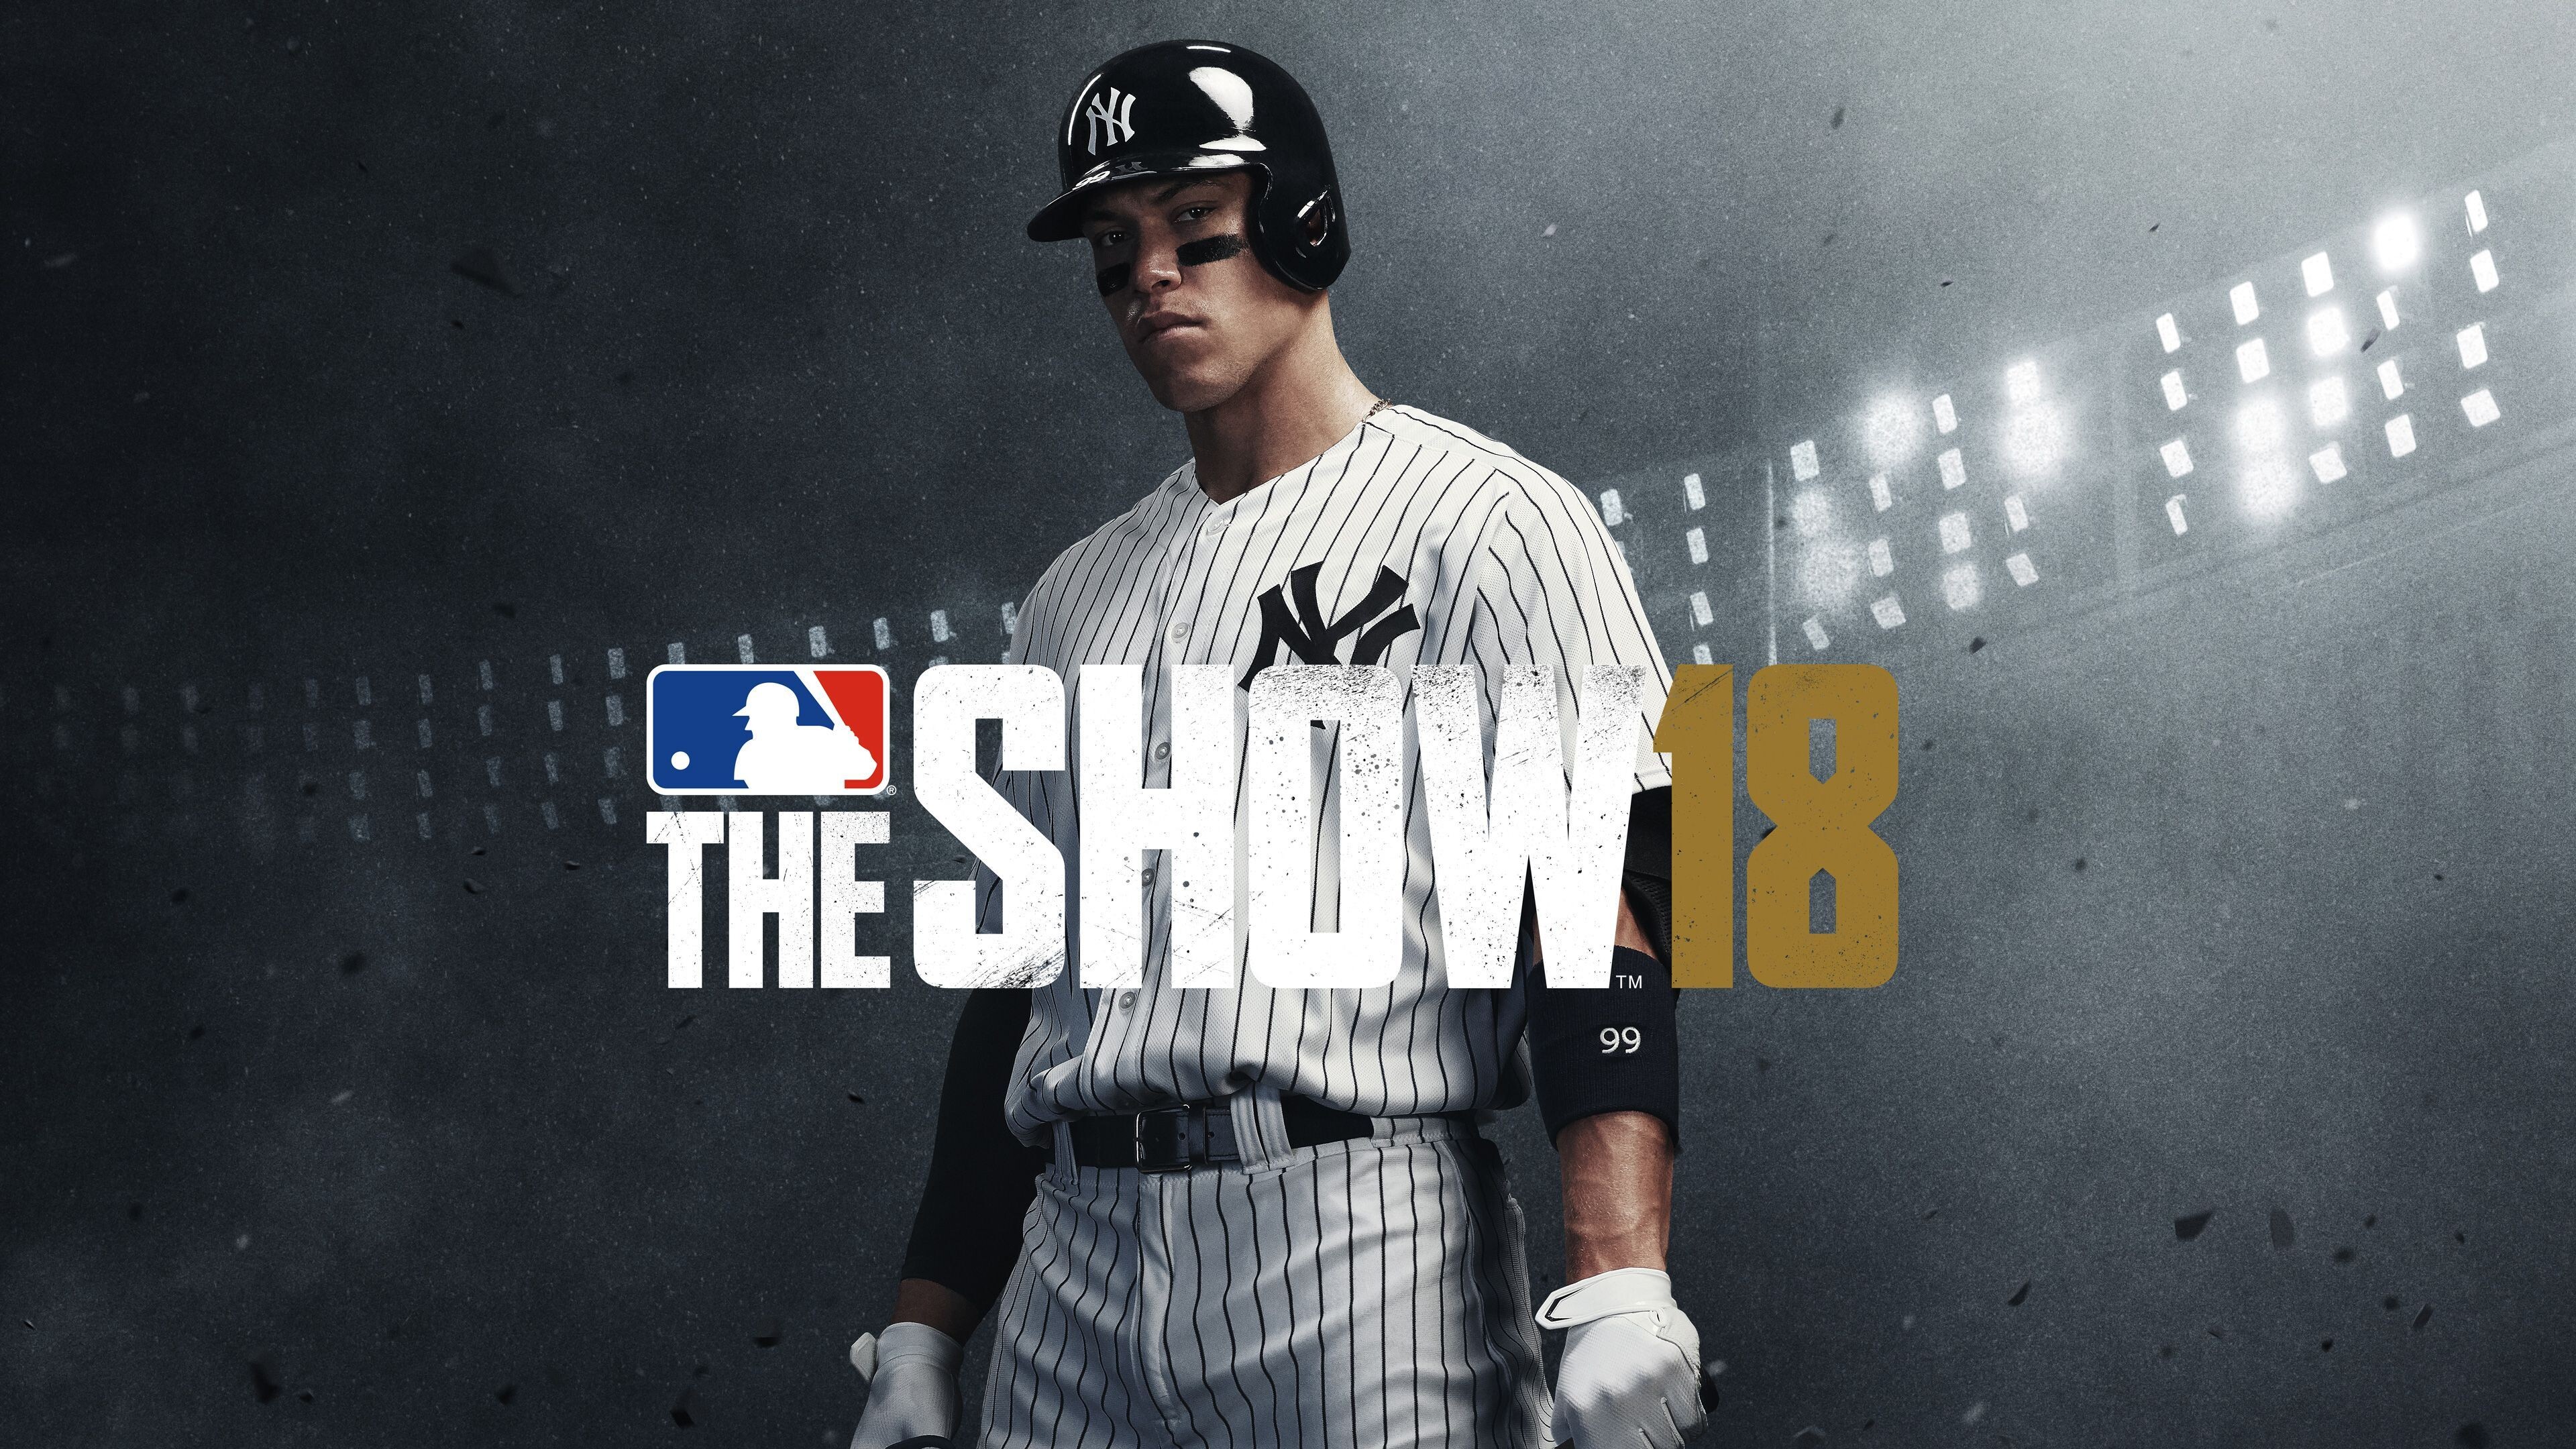 Giancarlo Stanton: MLB The Show 18, A baseball video game by San Diego Studio, New York Yankees outfielder Aaron Judge. 3840x2160 4K Wallpaper.